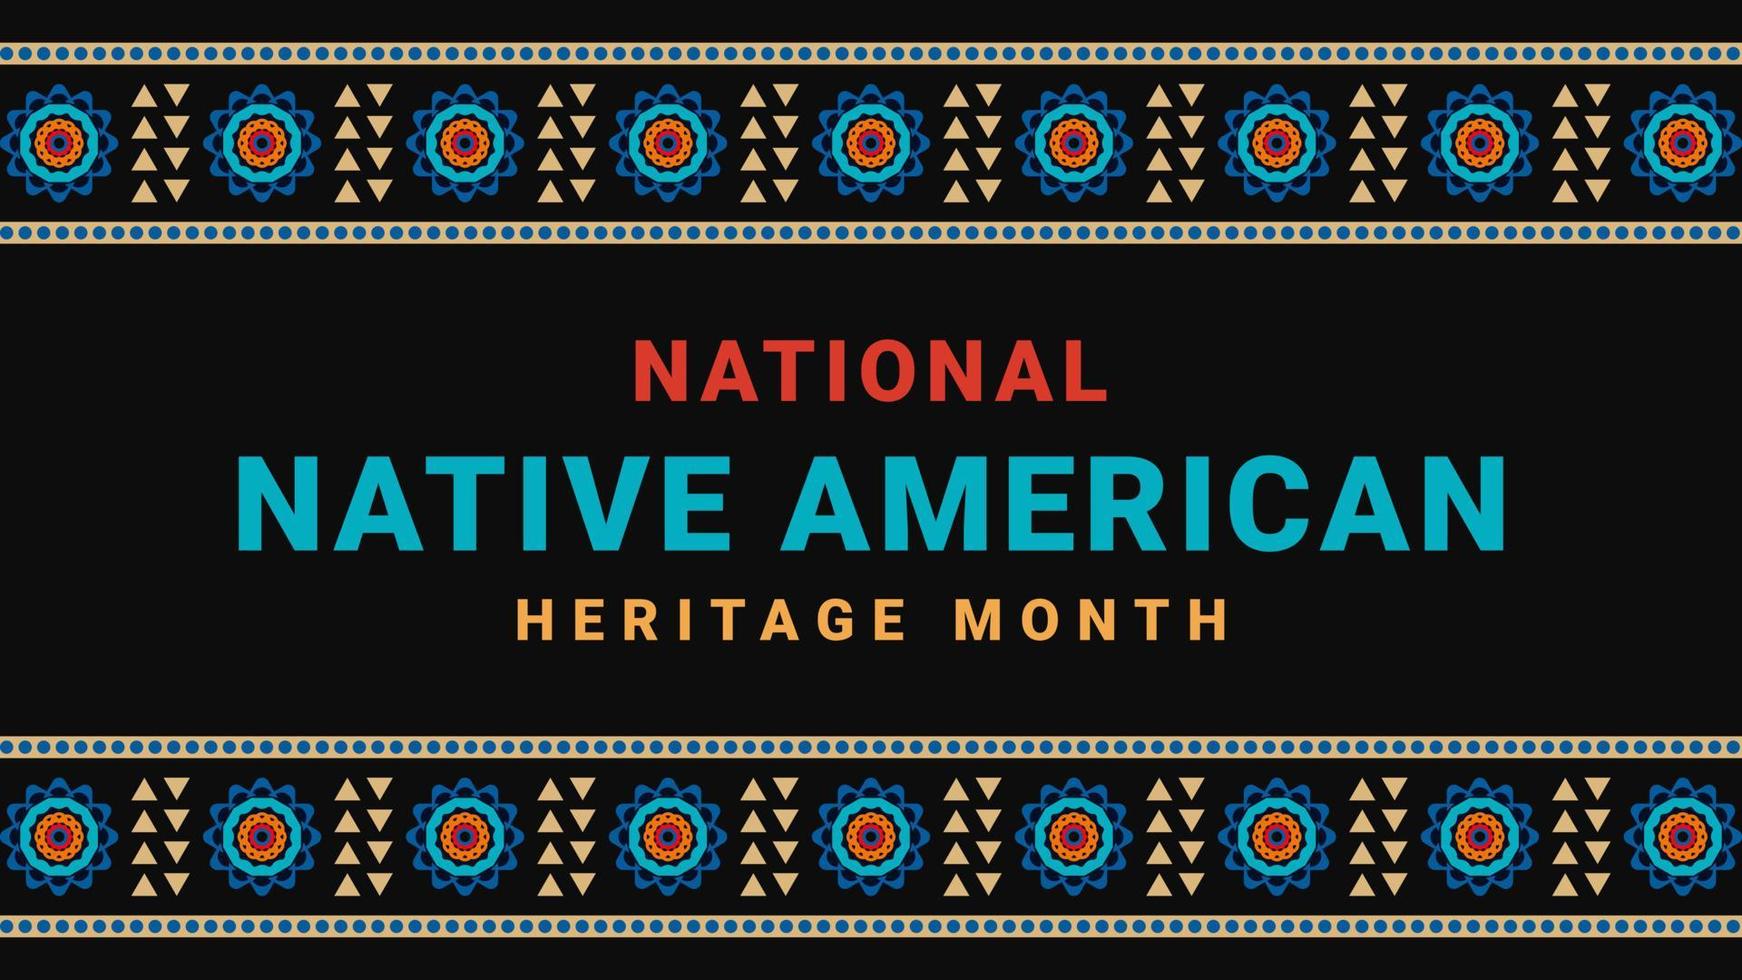 Native American Heritage Month. Background design with abstract ornaments celebrating Native Indians in America. vector